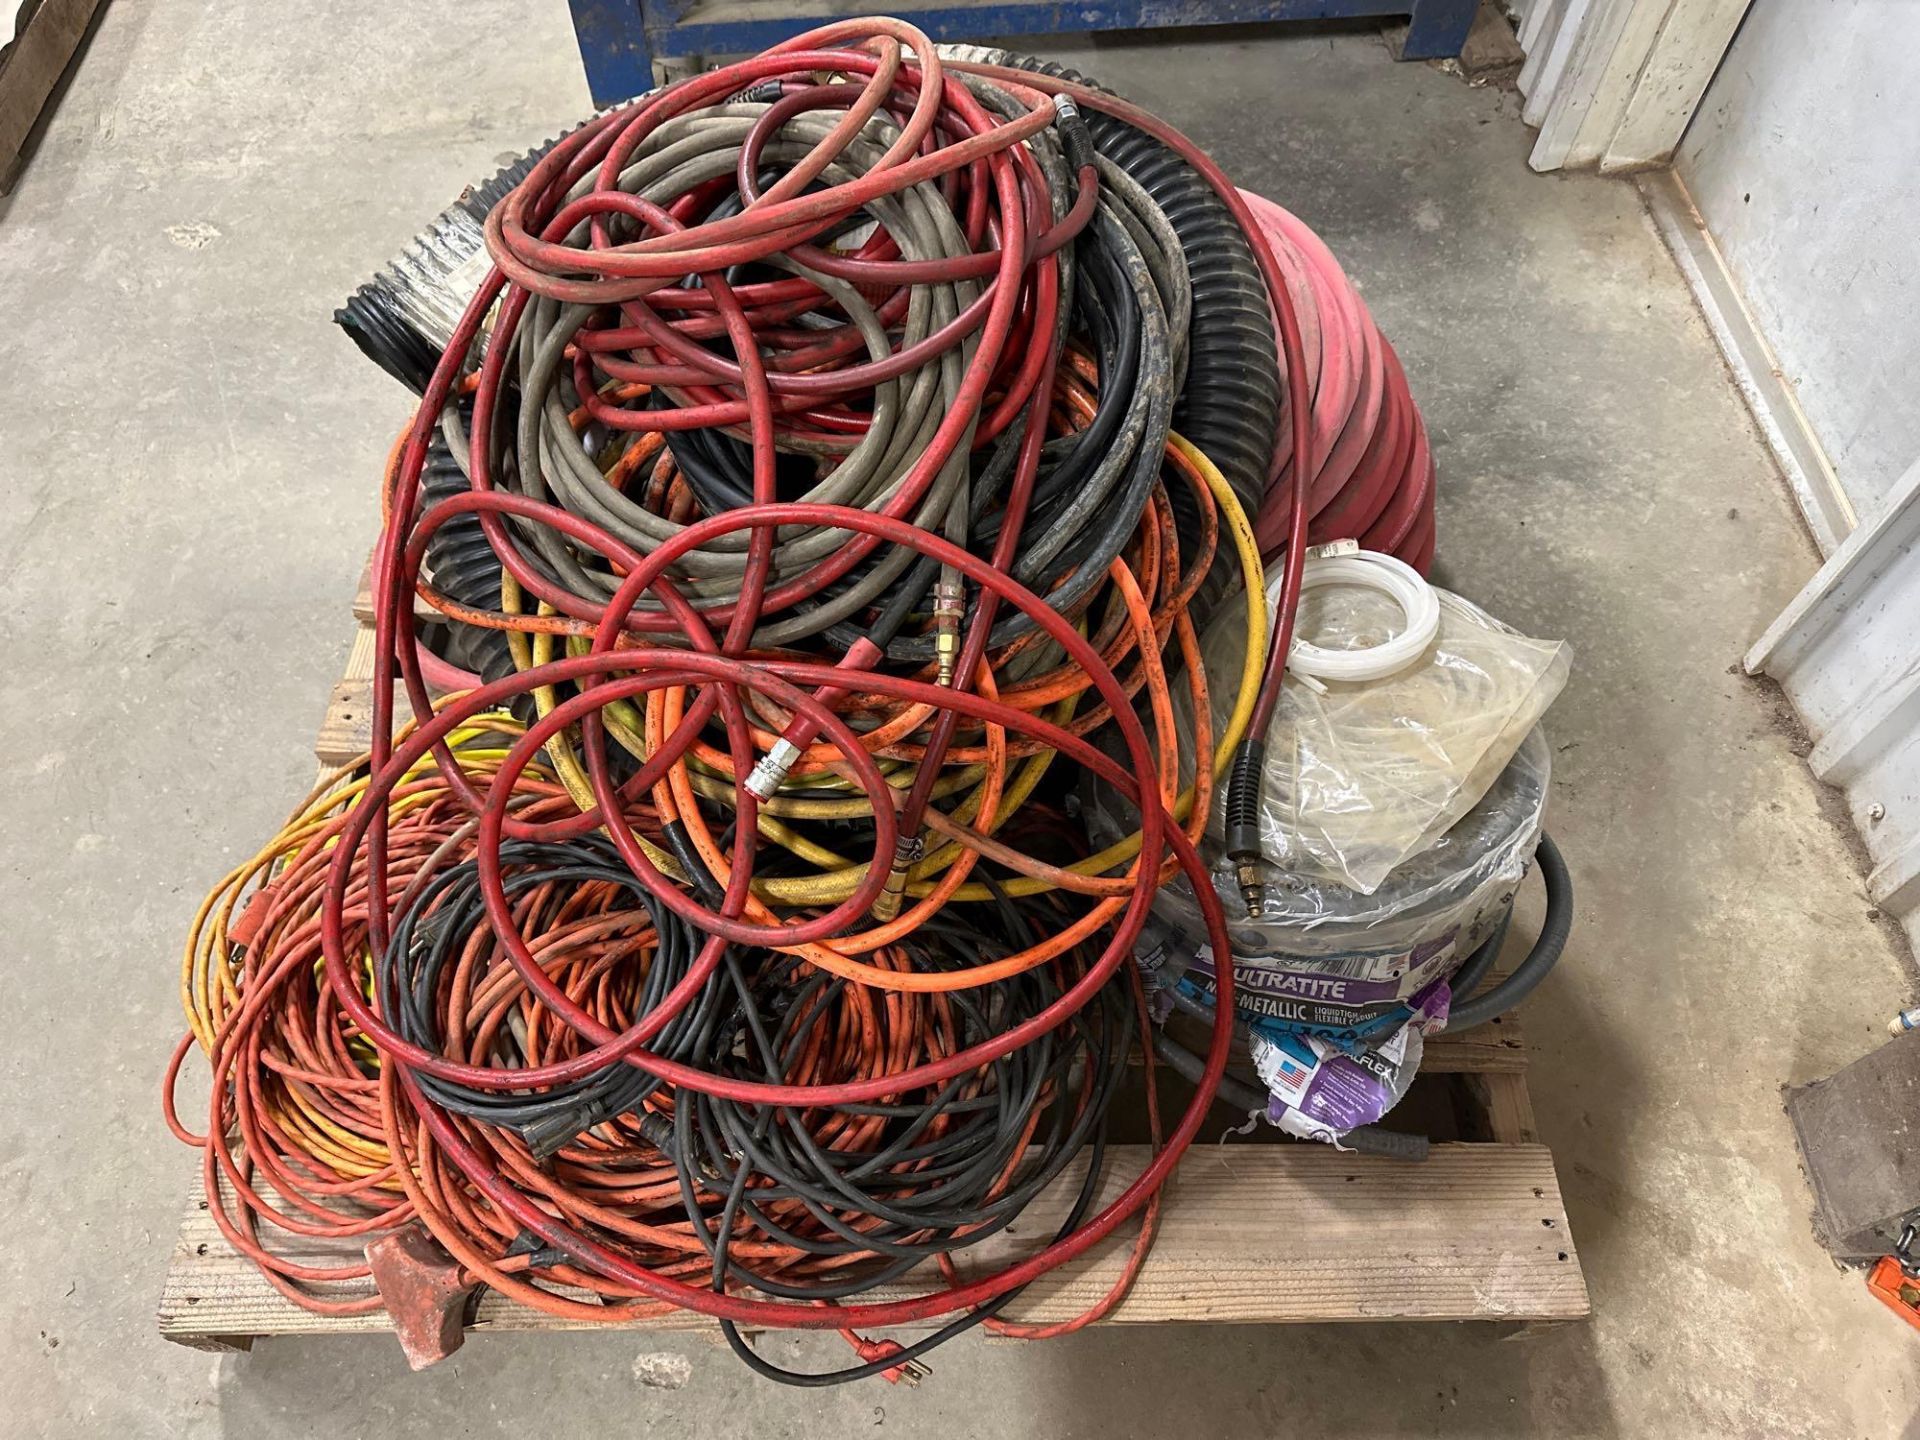 Pallet of Assorted Air Hoses and Extension Cords. See photo.